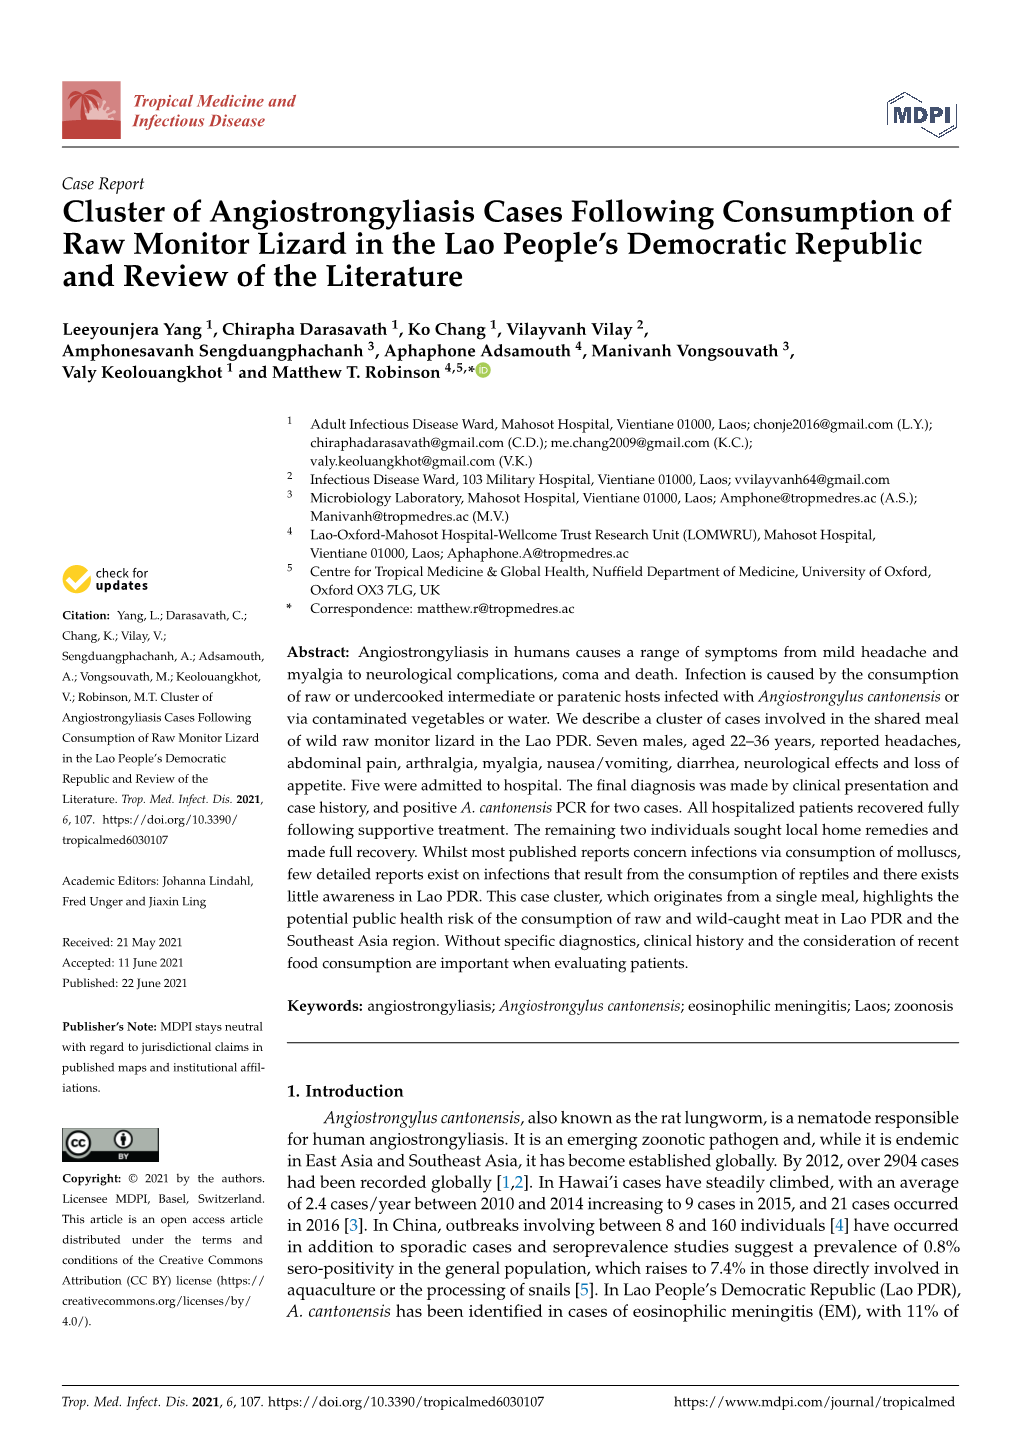 Cluster of Angiostrongyliasis Cases Following Consumption of Raw Monitor Lizard in the Lao People’S Democratic Republic and Review of the Literature